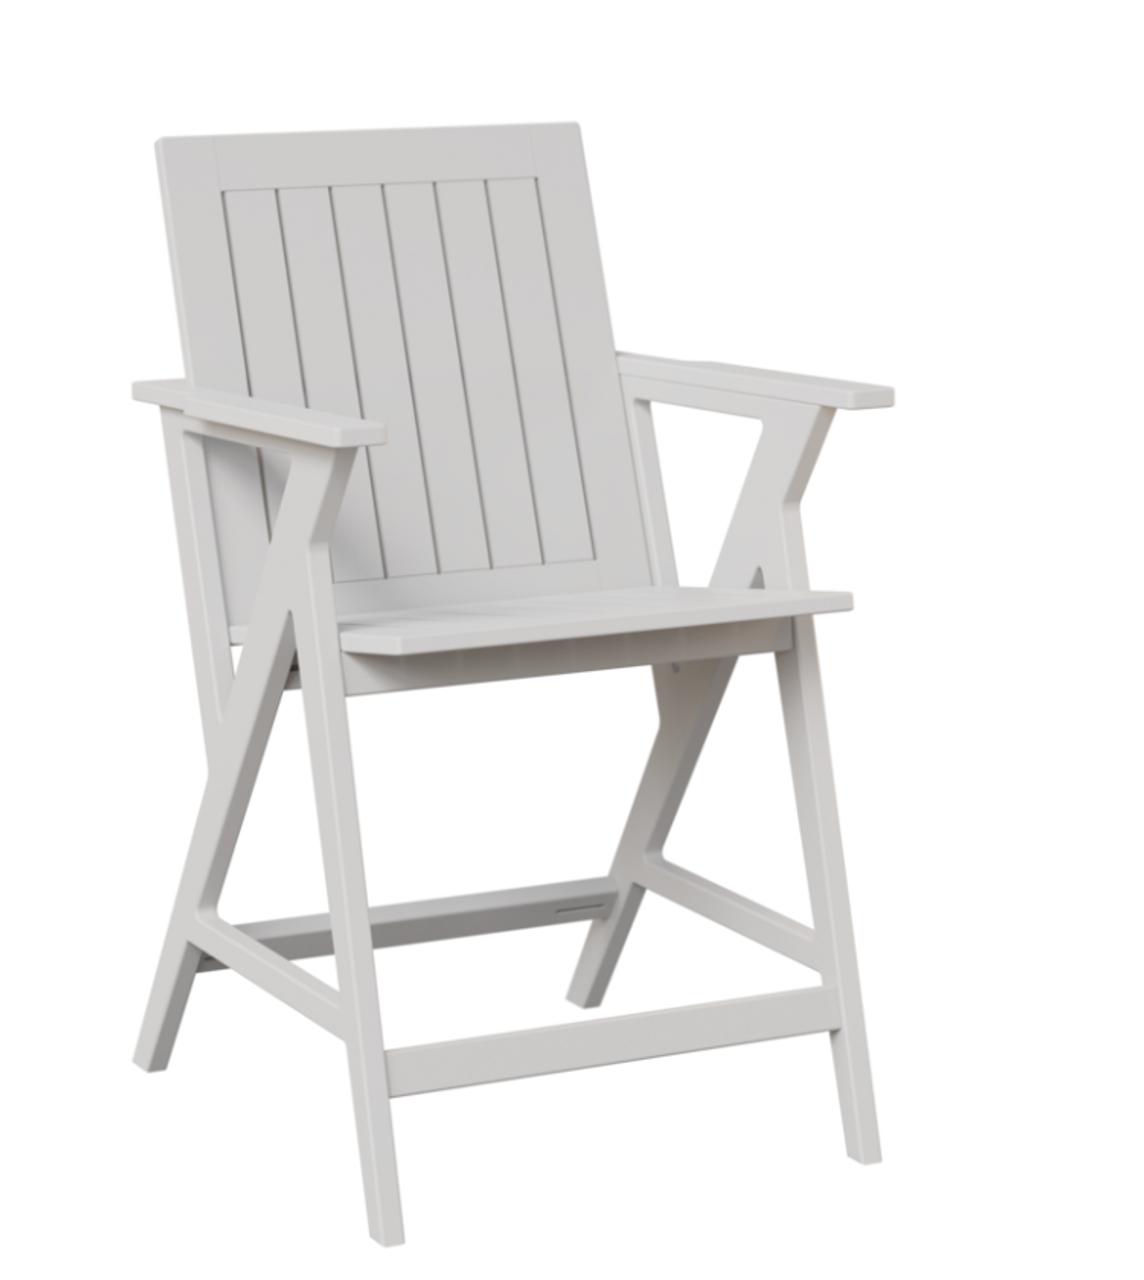 Counter Height Arm Chair in Matte White. Cushions sold separately